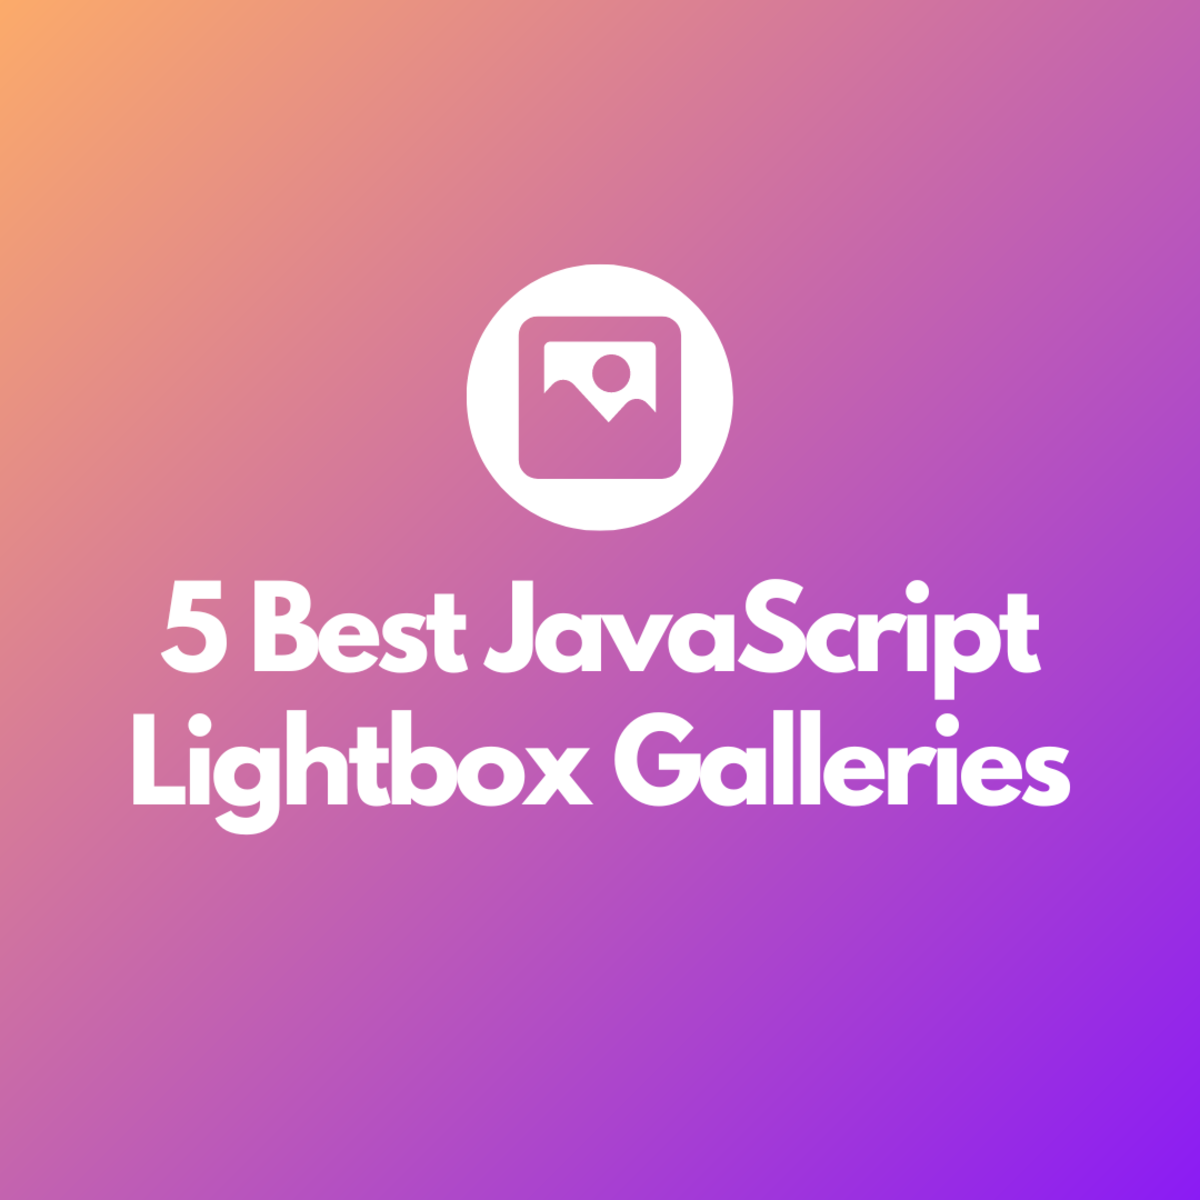 5 Best JavaScript Lightbox Galleries to Check Out: The Ultimate List